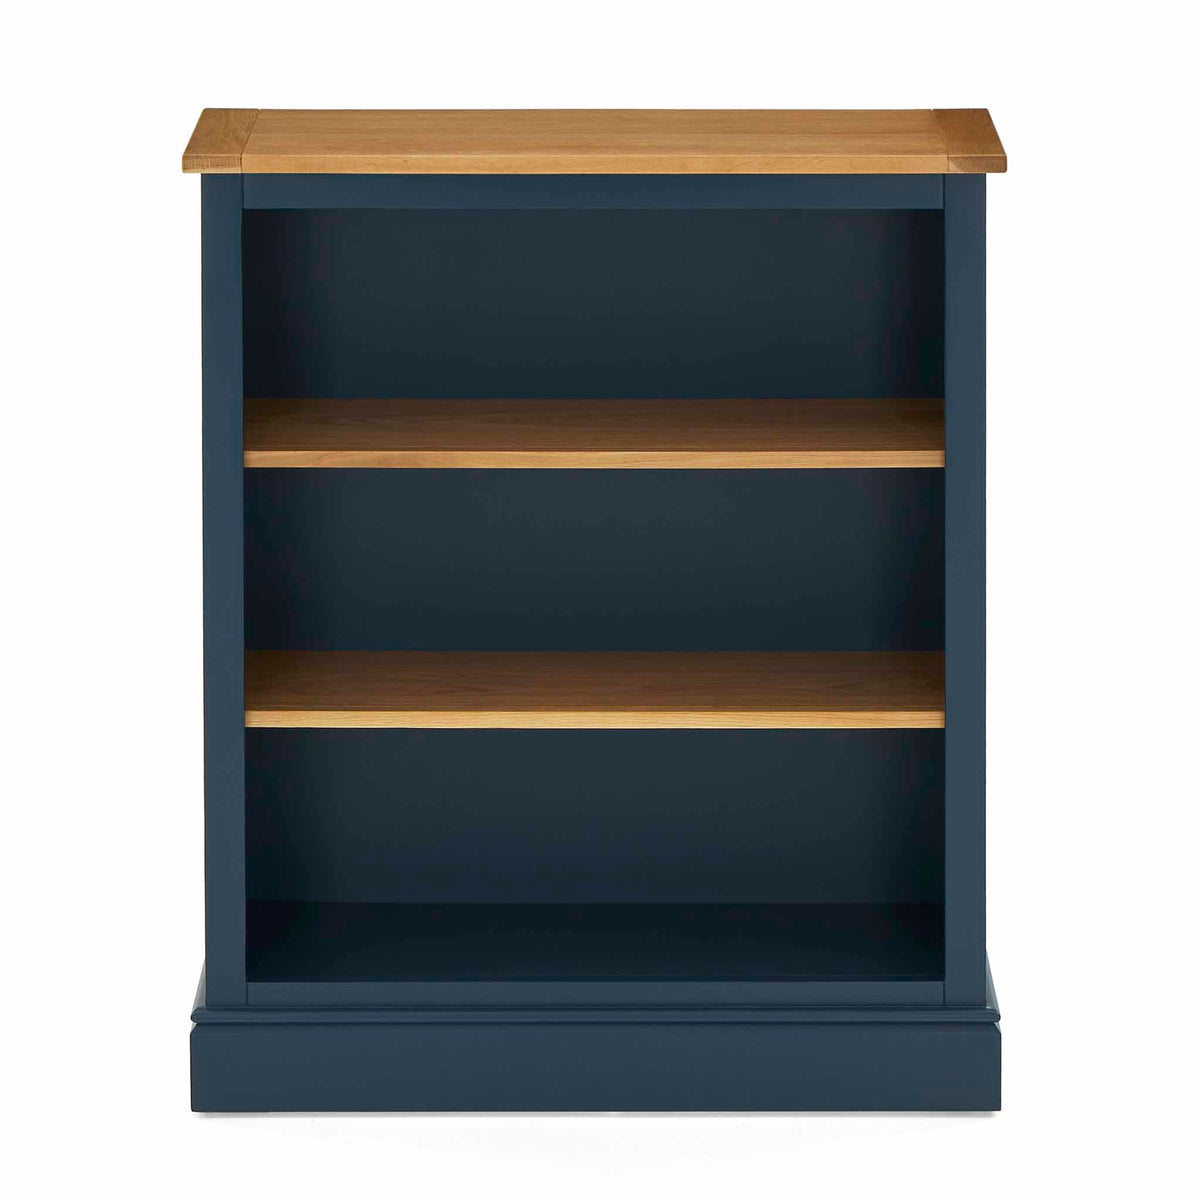 Chichester Stiffkey Blue Small Bookcase - Front view showing oak top